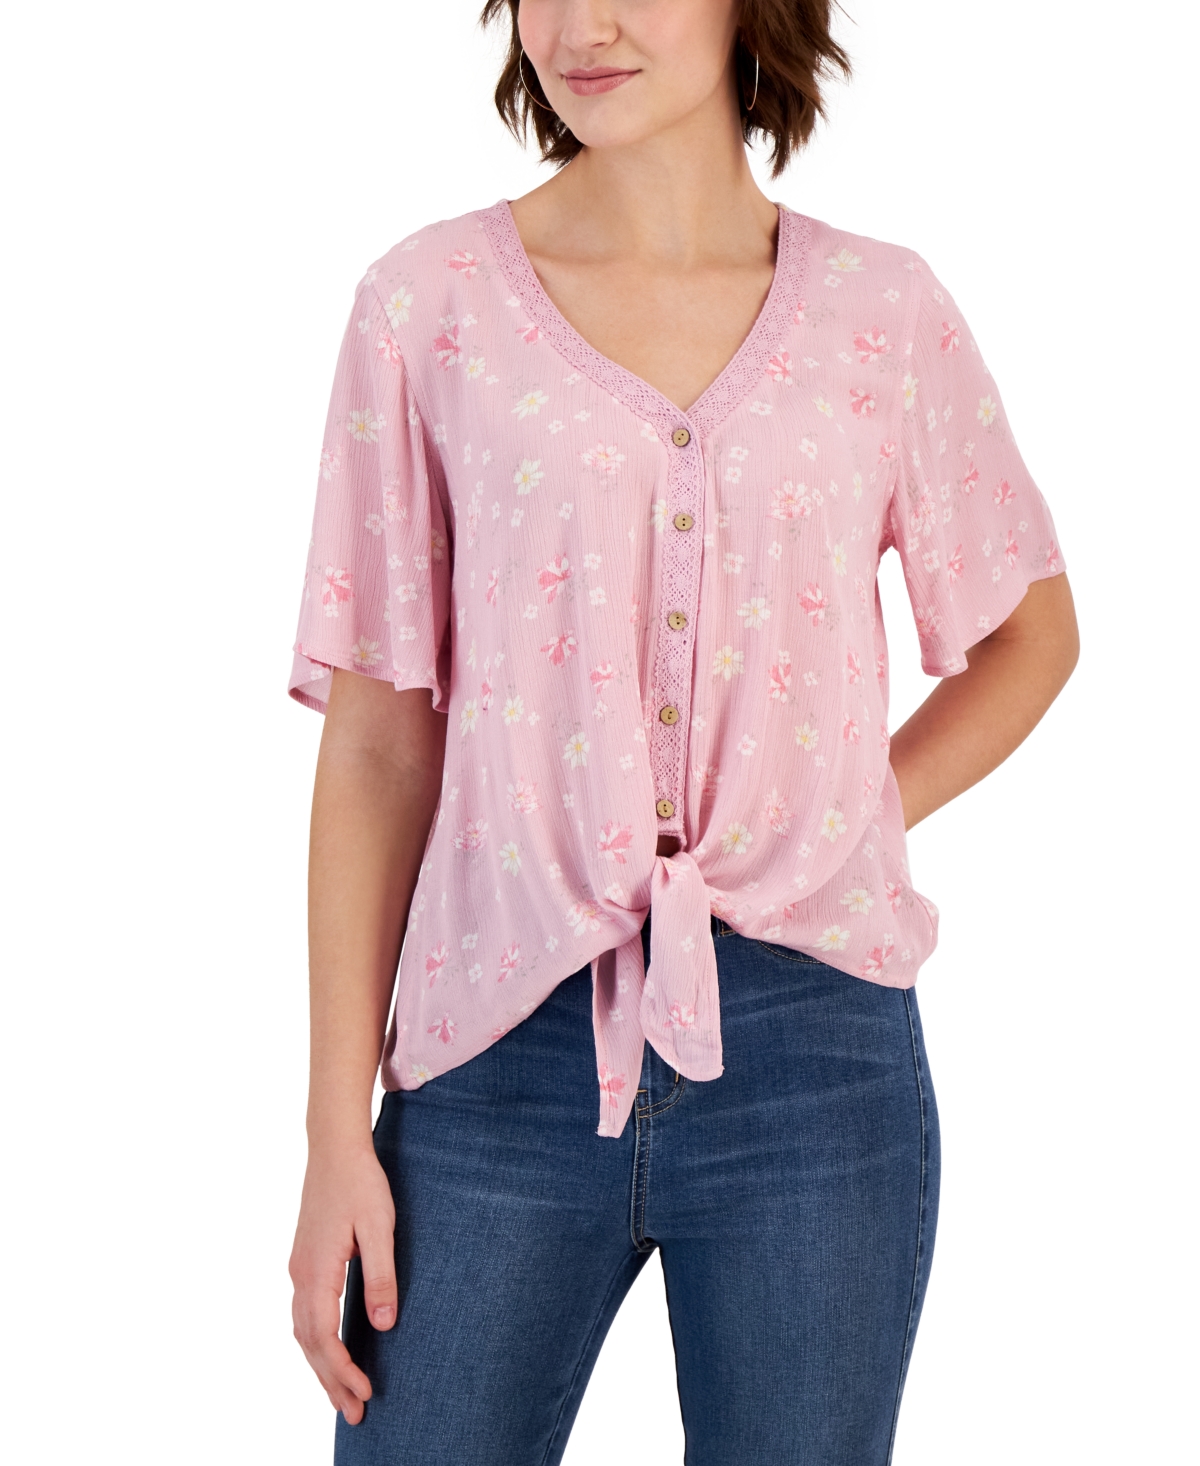 Hippie Rose Juniors' Textured Printed Button-Front Top